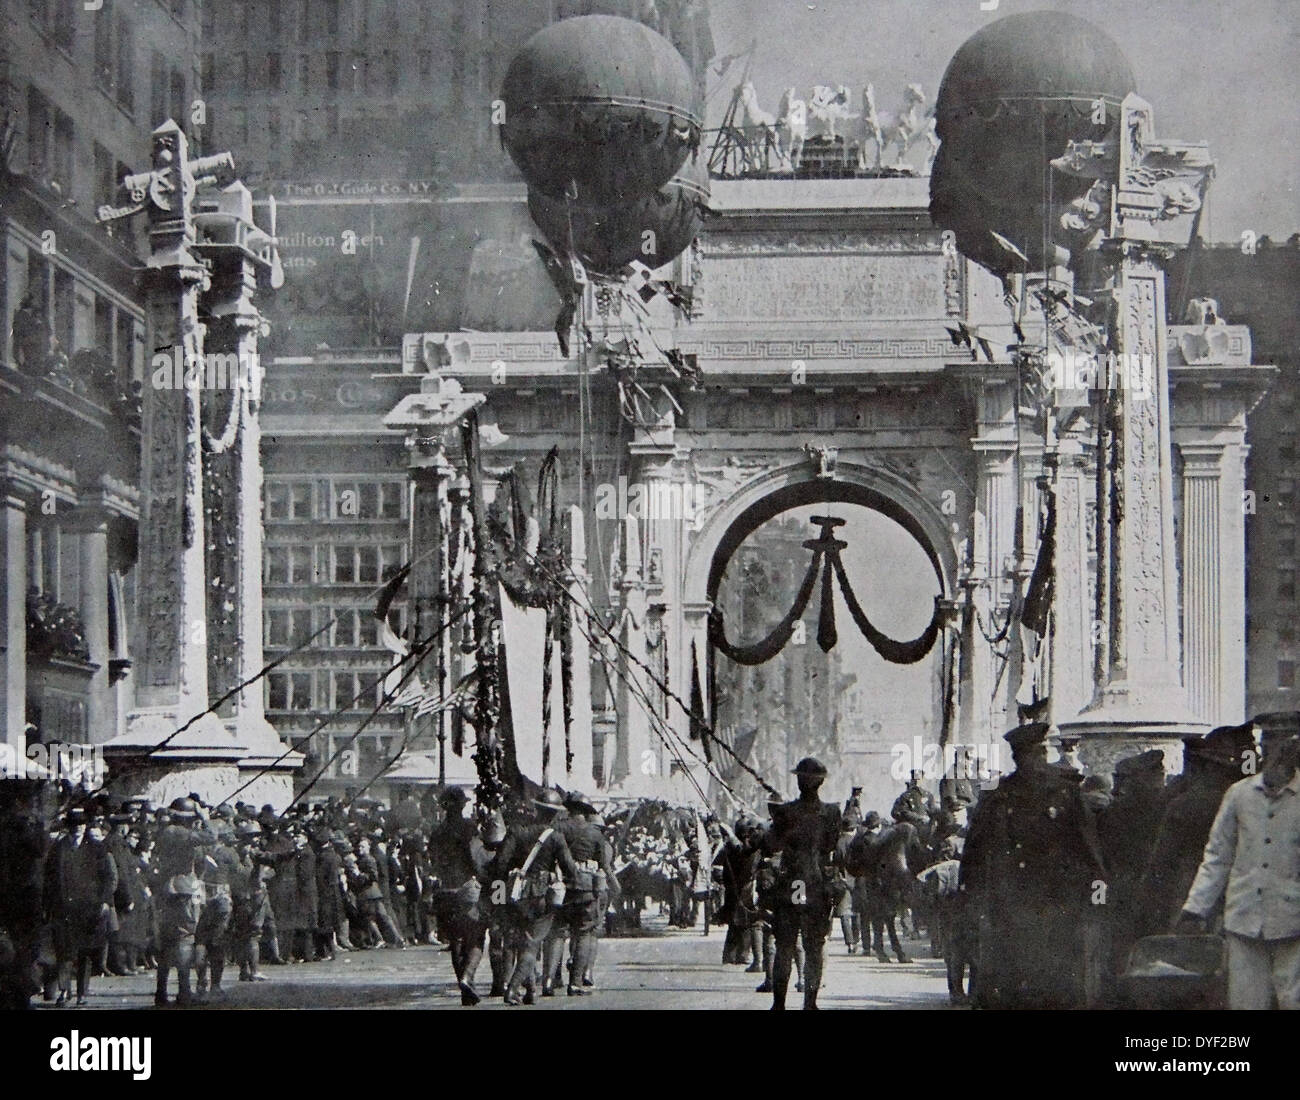 American troops marching under a Victory Arch in New York, to mark their return from World war one. Stock Photo